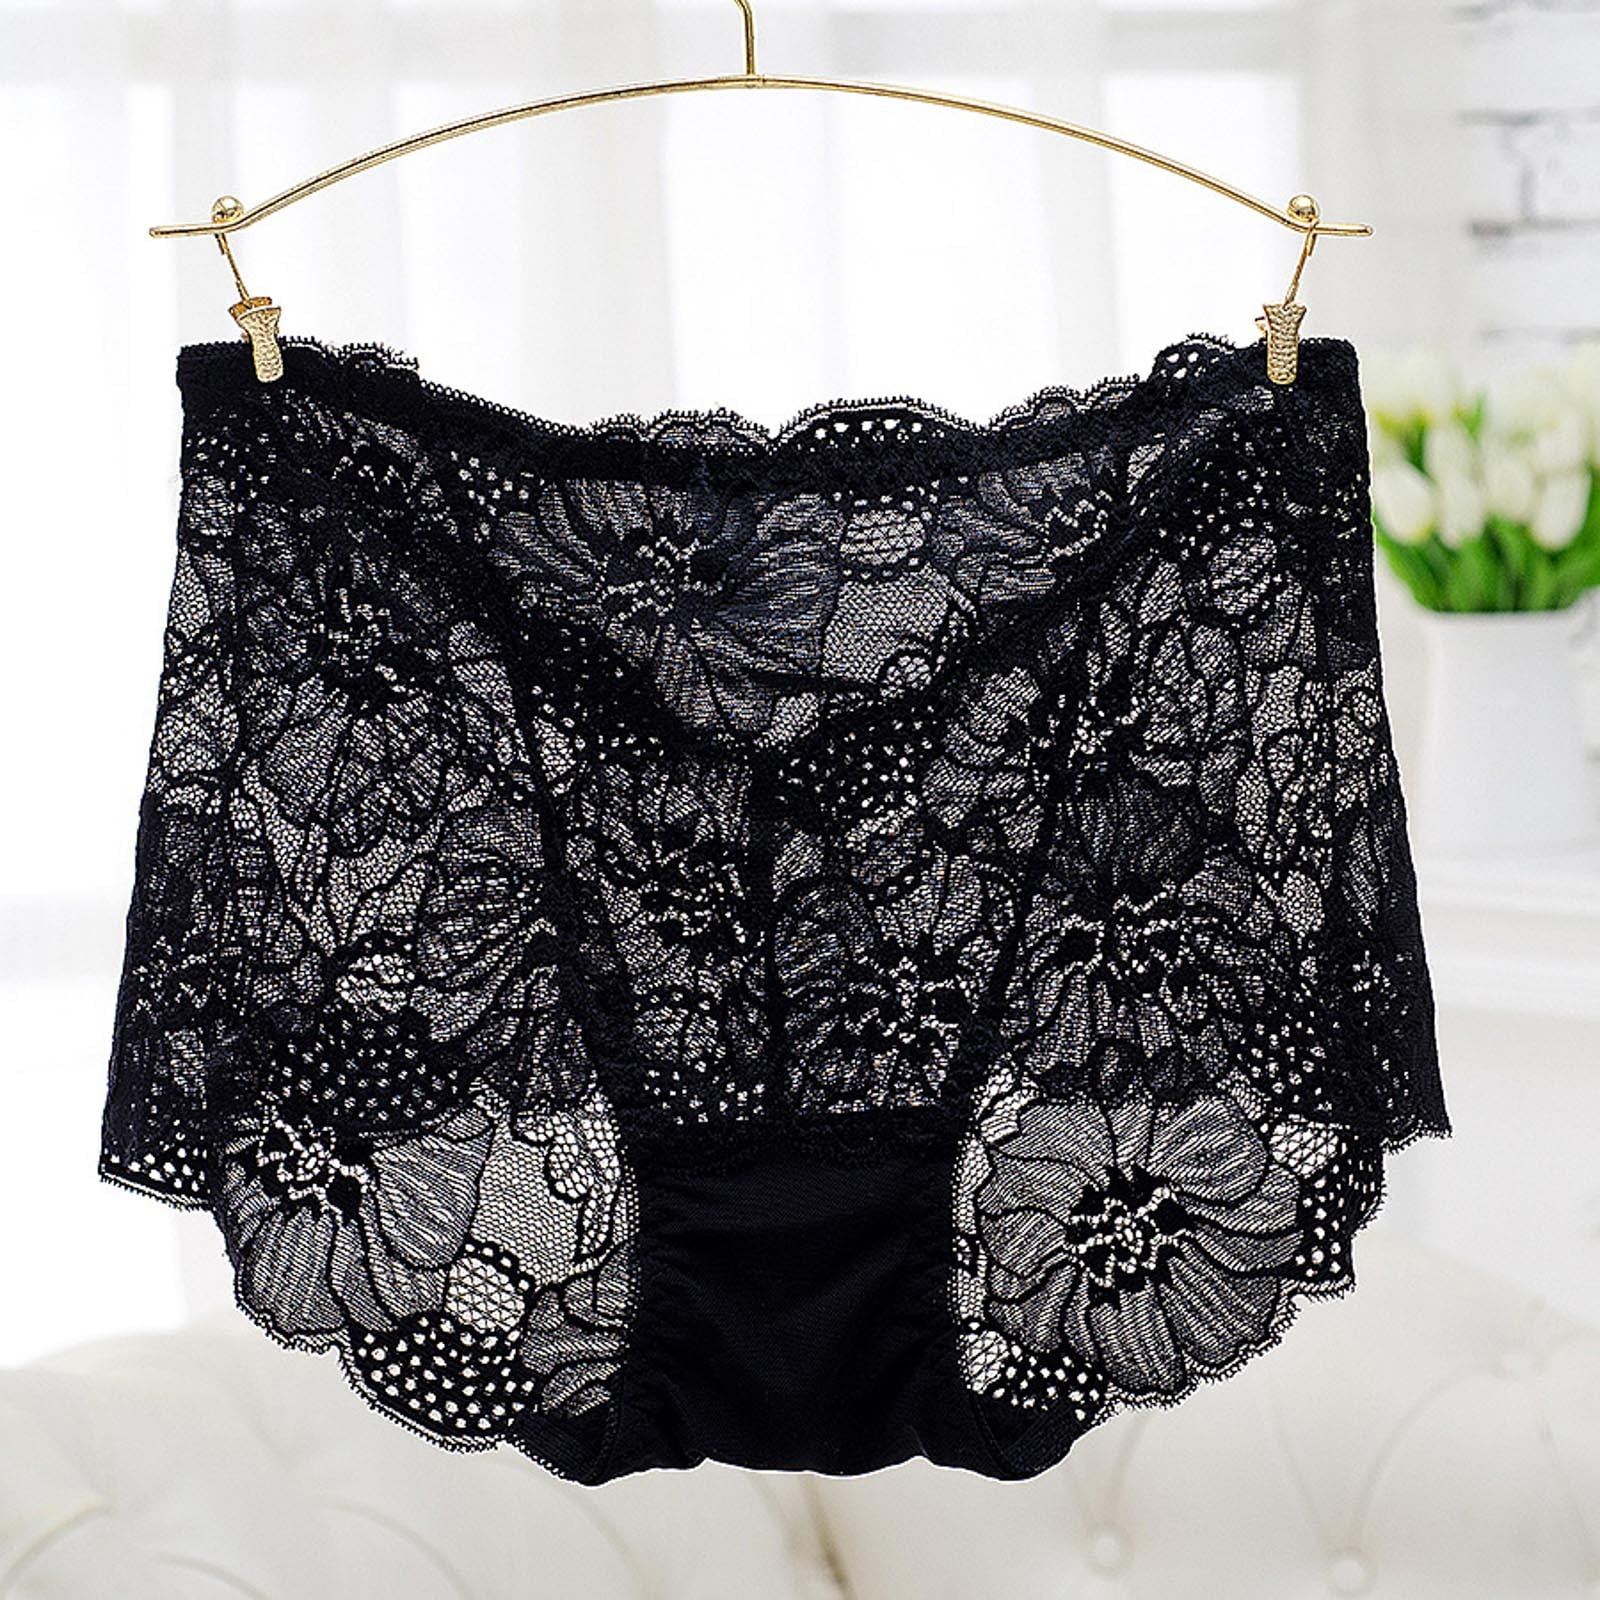 Good Morning Panty Cute & Sexy Hipster Bikini Women's Undies, Underwear  Novelty Design Panties Briefs, Lingerie (Black, Small) at  Women's  Clothing store